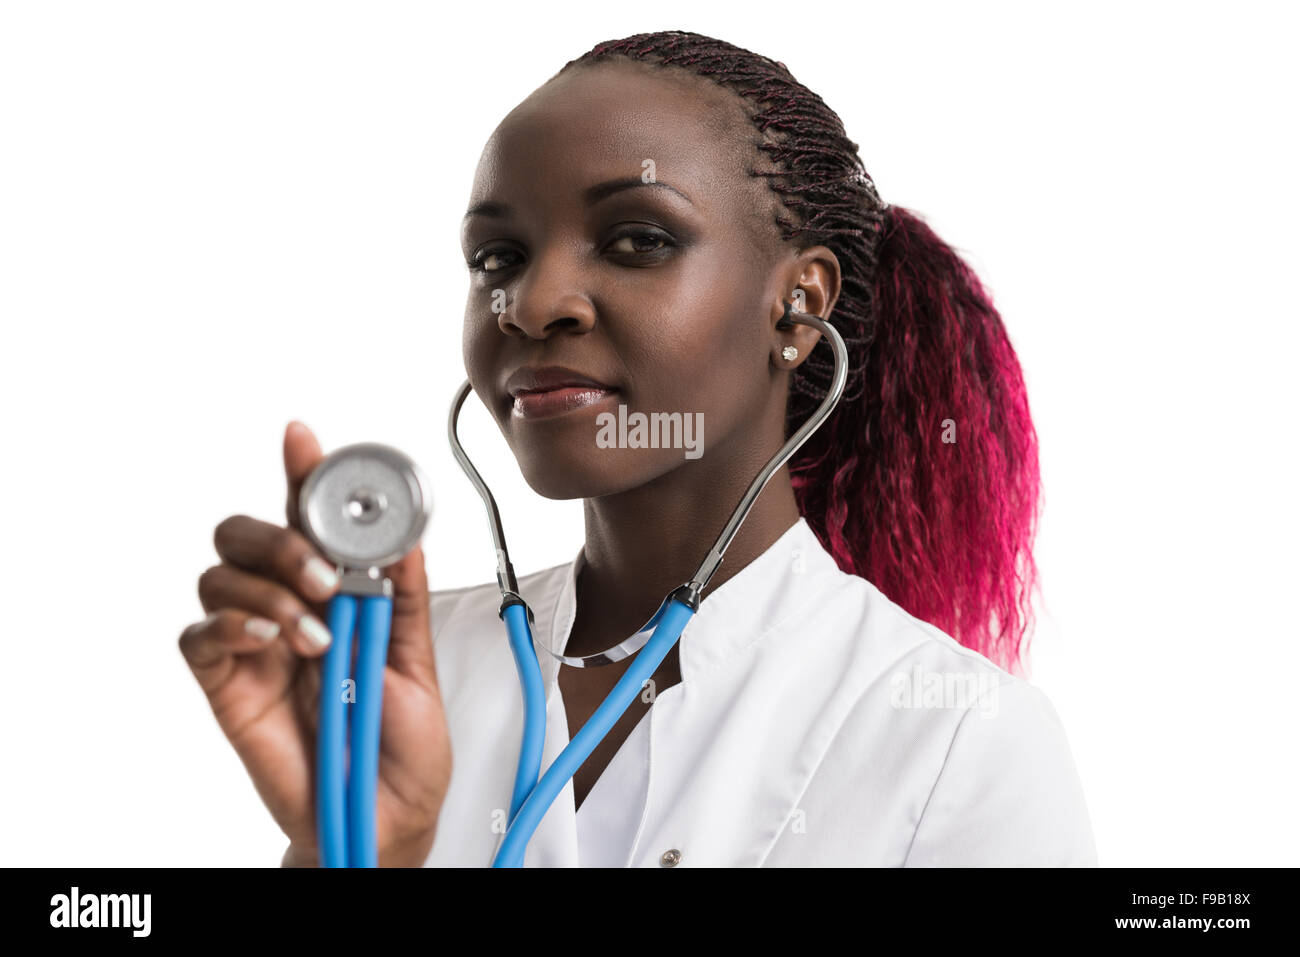 African female Medical doctor with stethoscope Stock Photo